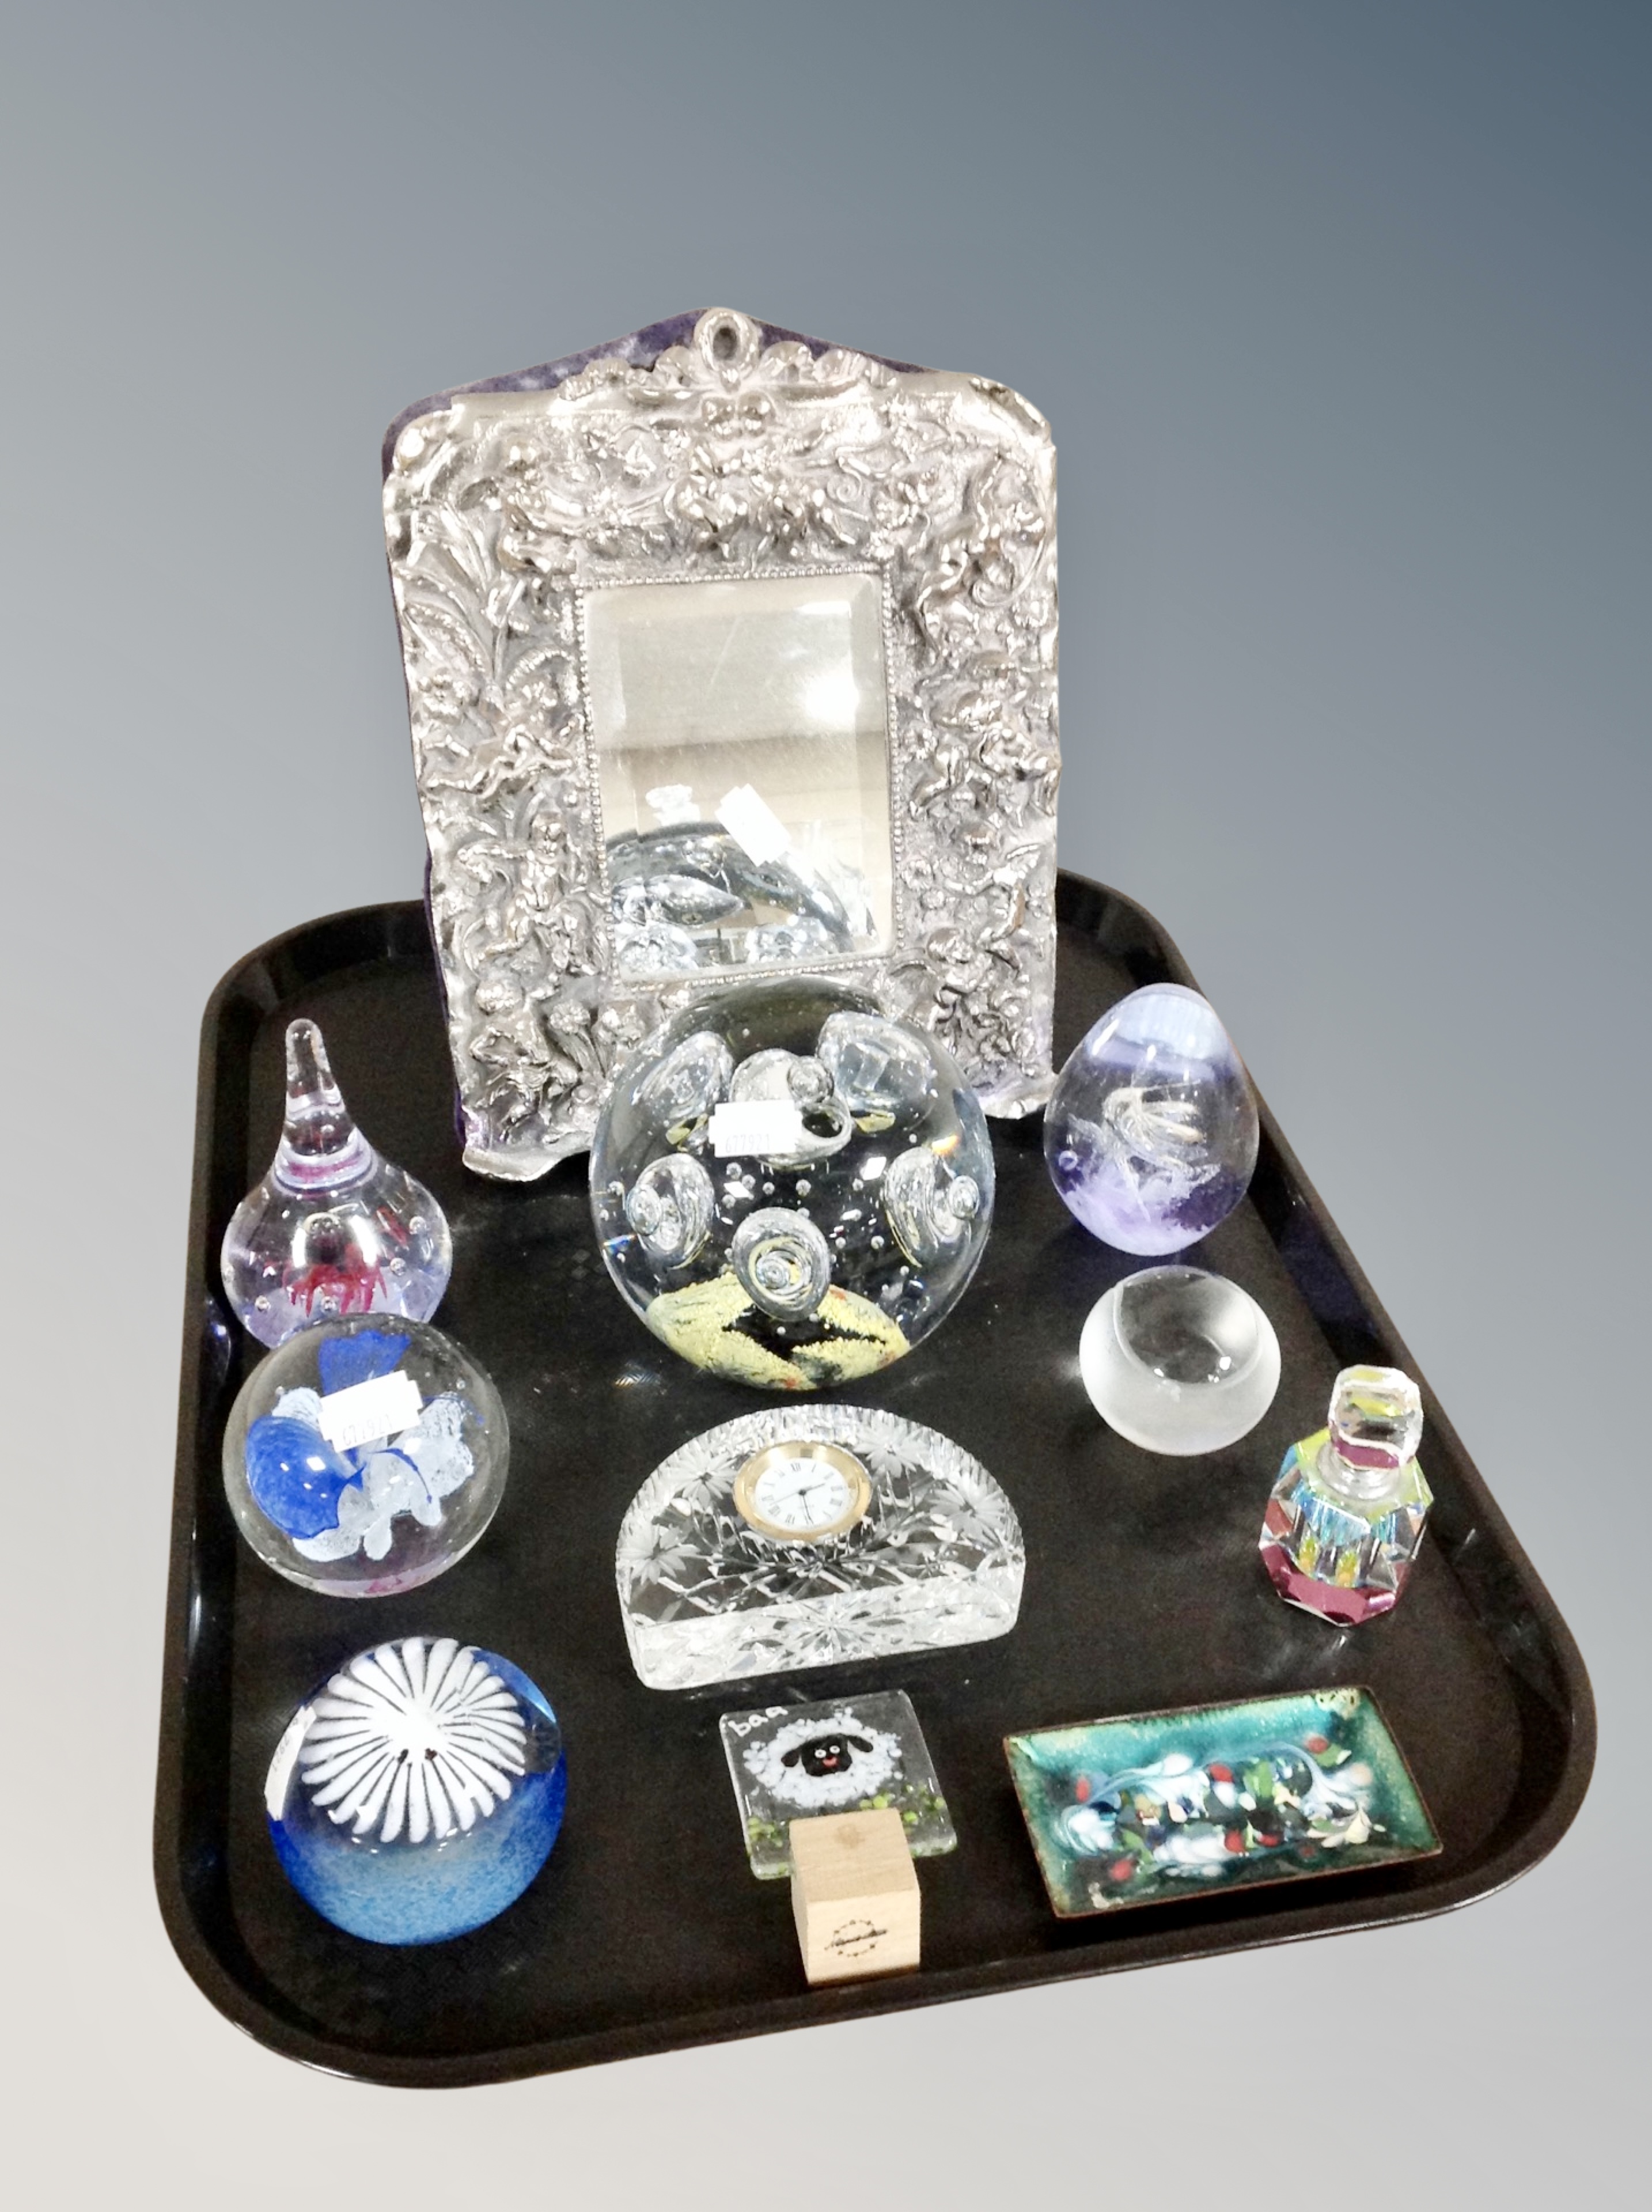 A tray of glass paperweights, decorative easel mirror,